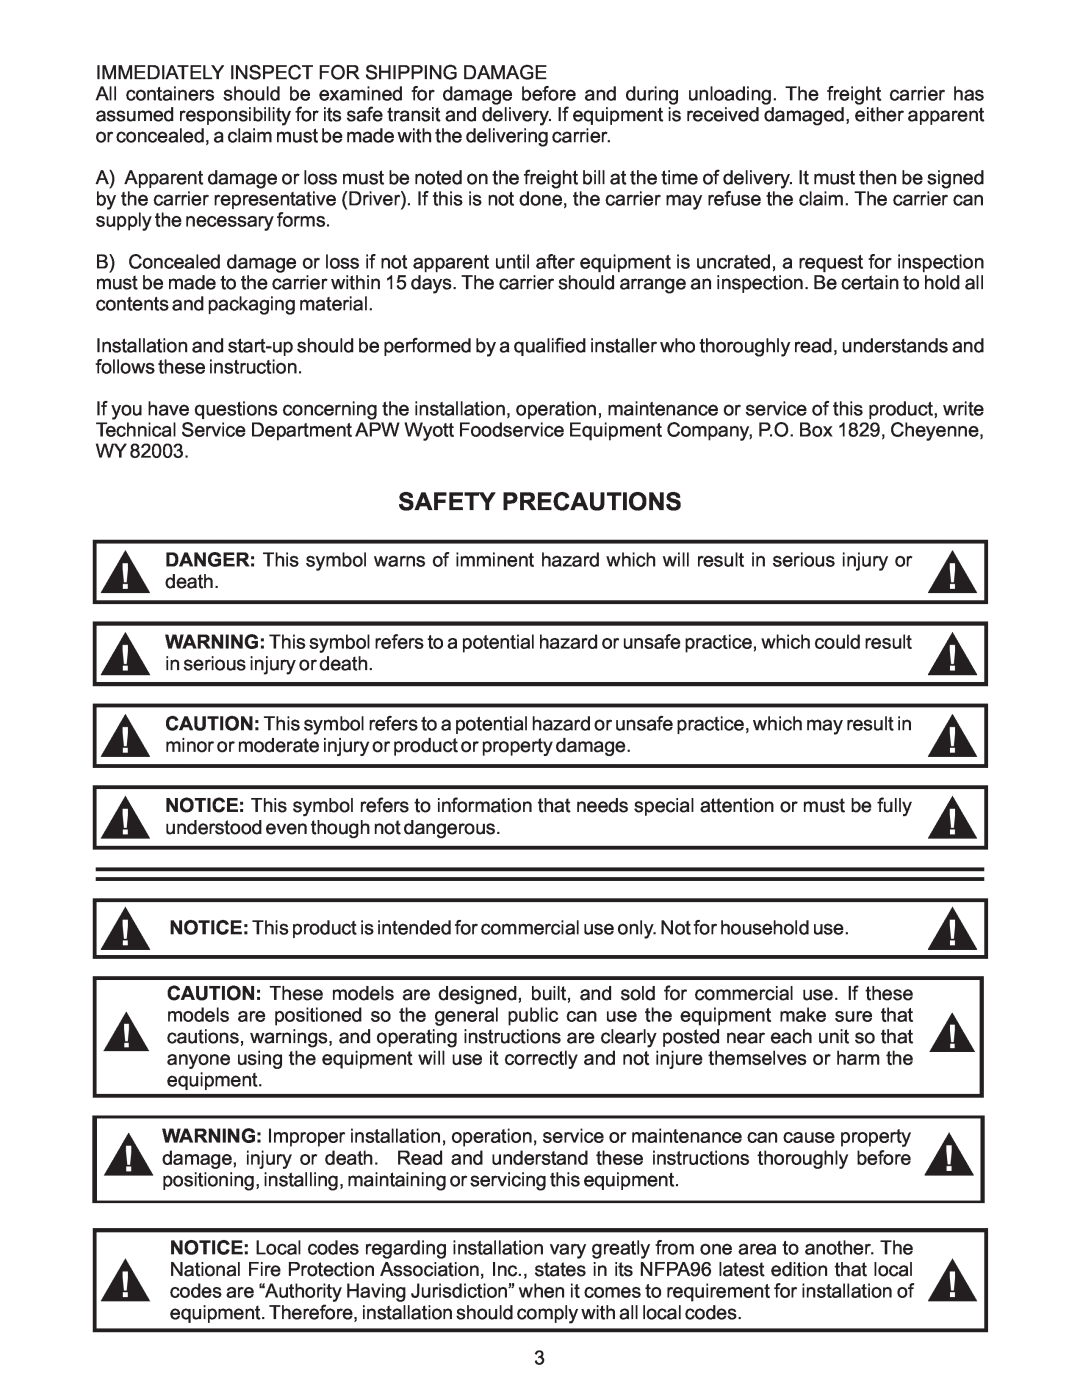 APW Wyott GCB-48H, GCRB-48H Safety Precautions, in serious injury or death, understood even though not dangerous 